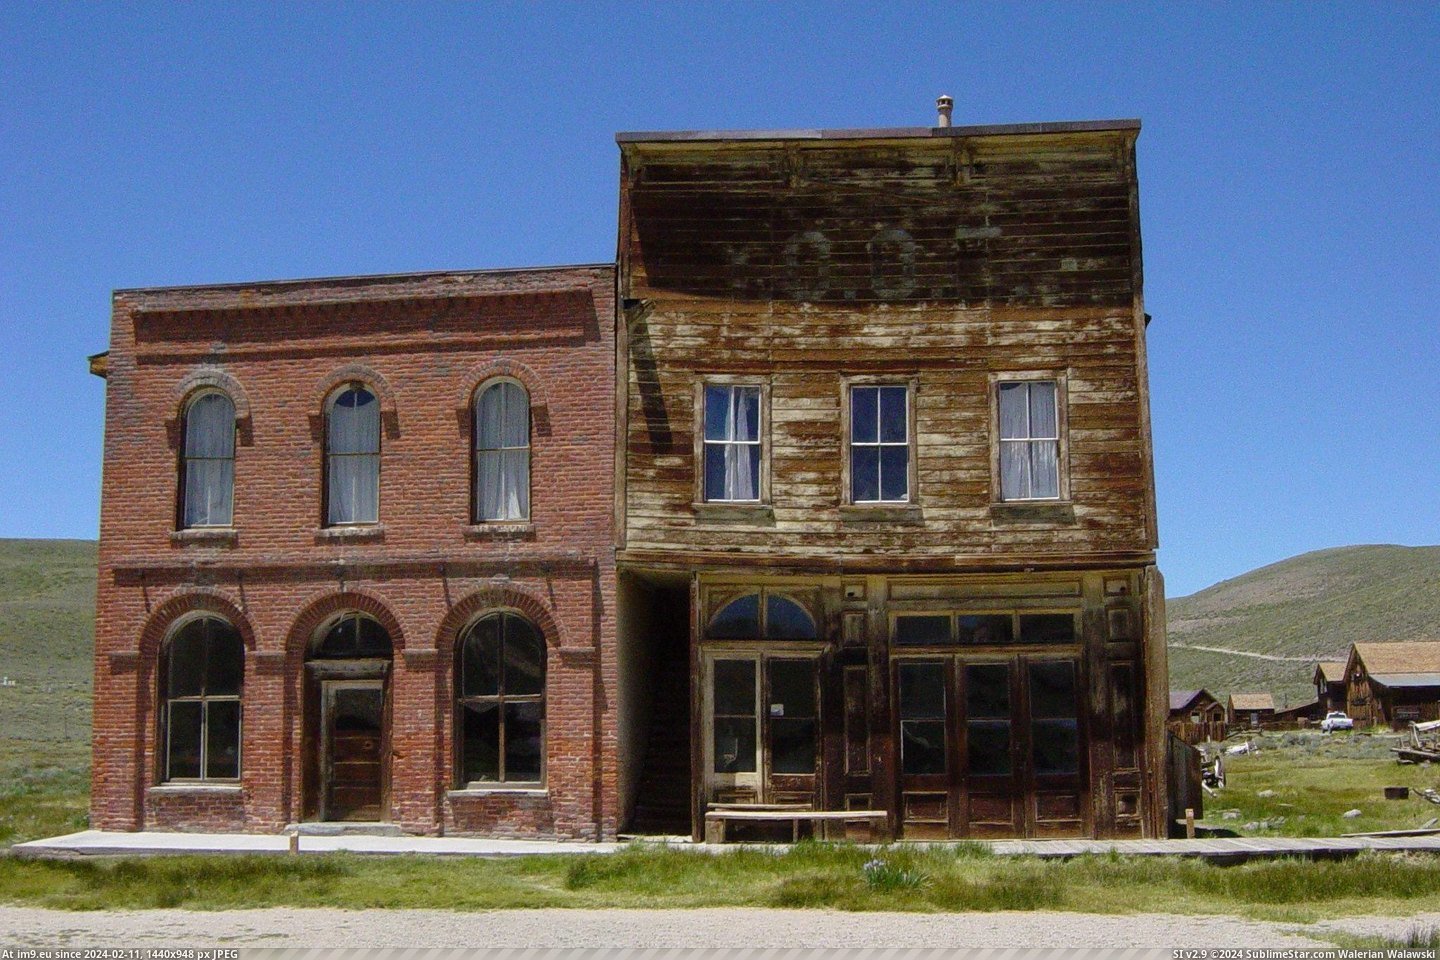 Ioof Hall And Post Office In Bodie, California (in Bodie - a ghost town in Eastern California)